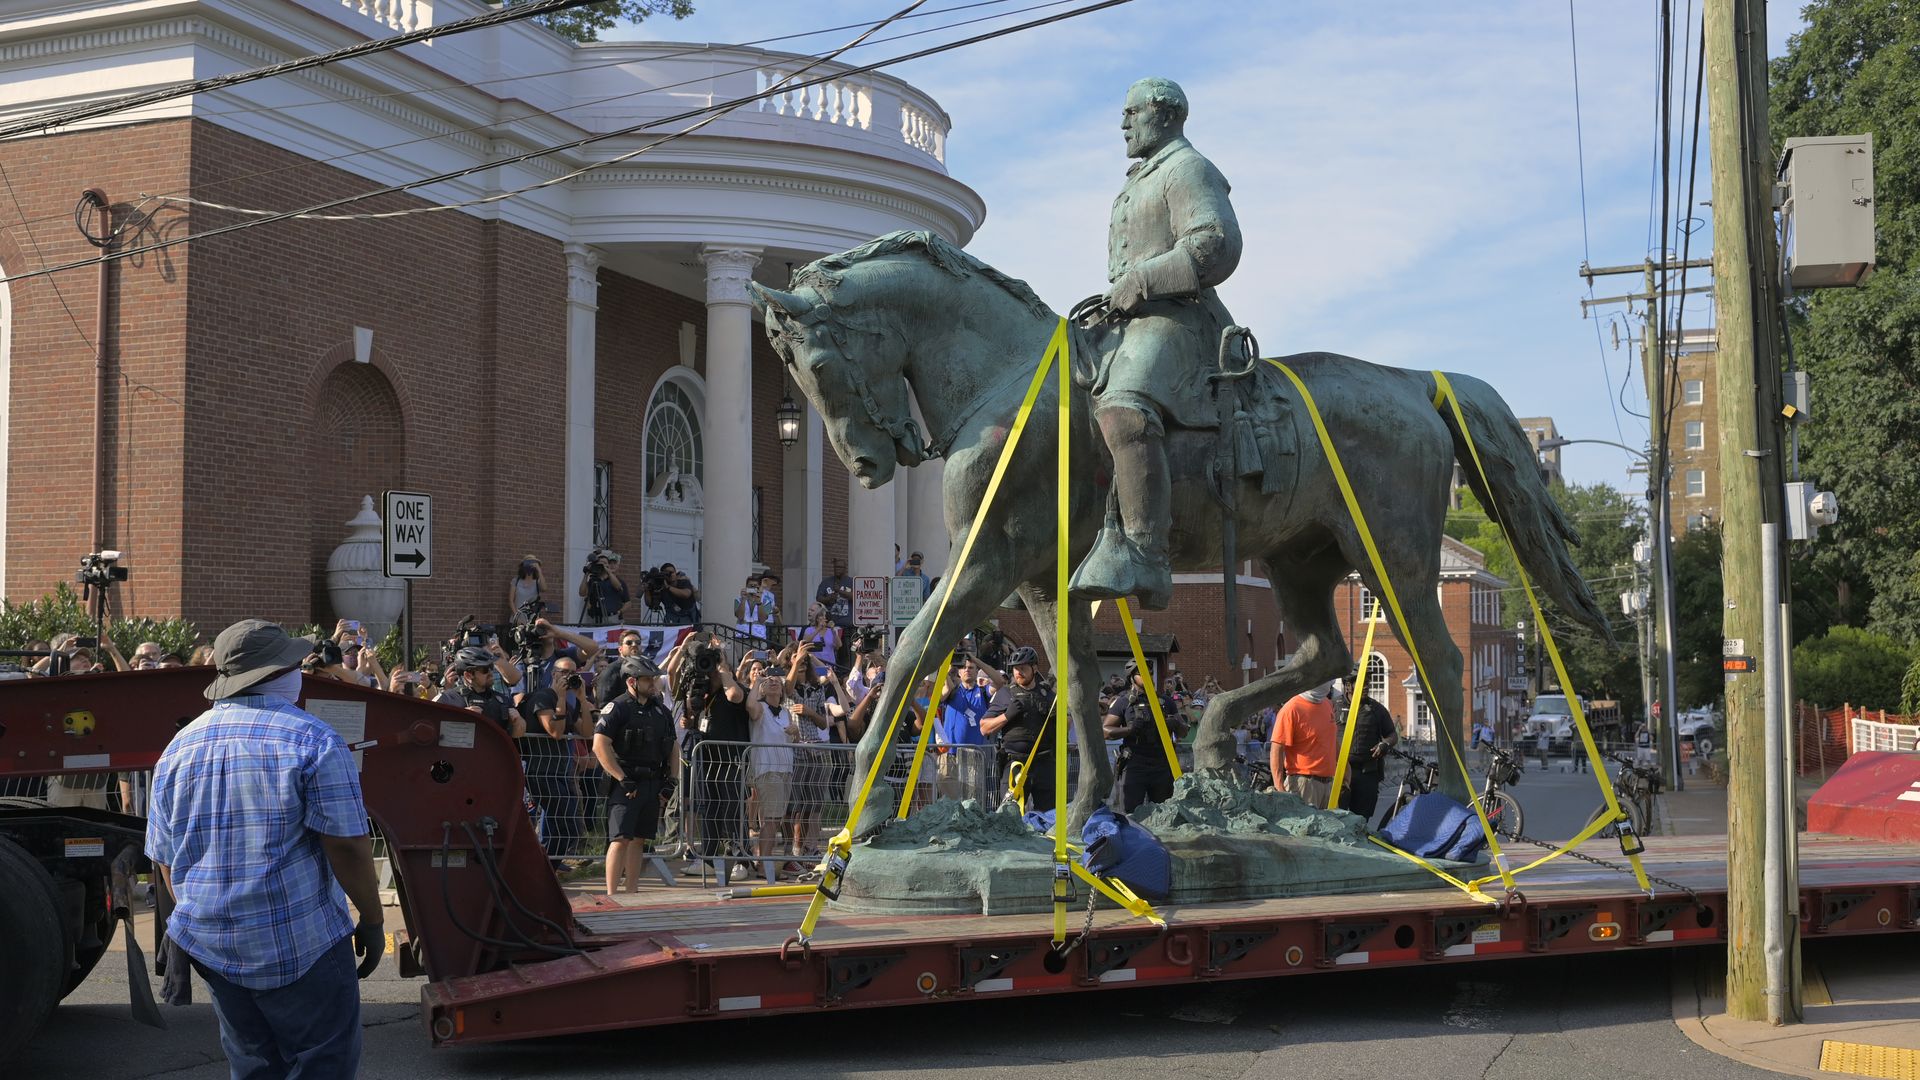 A statue of Confederate general Robert E Lee after being removed from Market Street Park in Charlottesville, VA